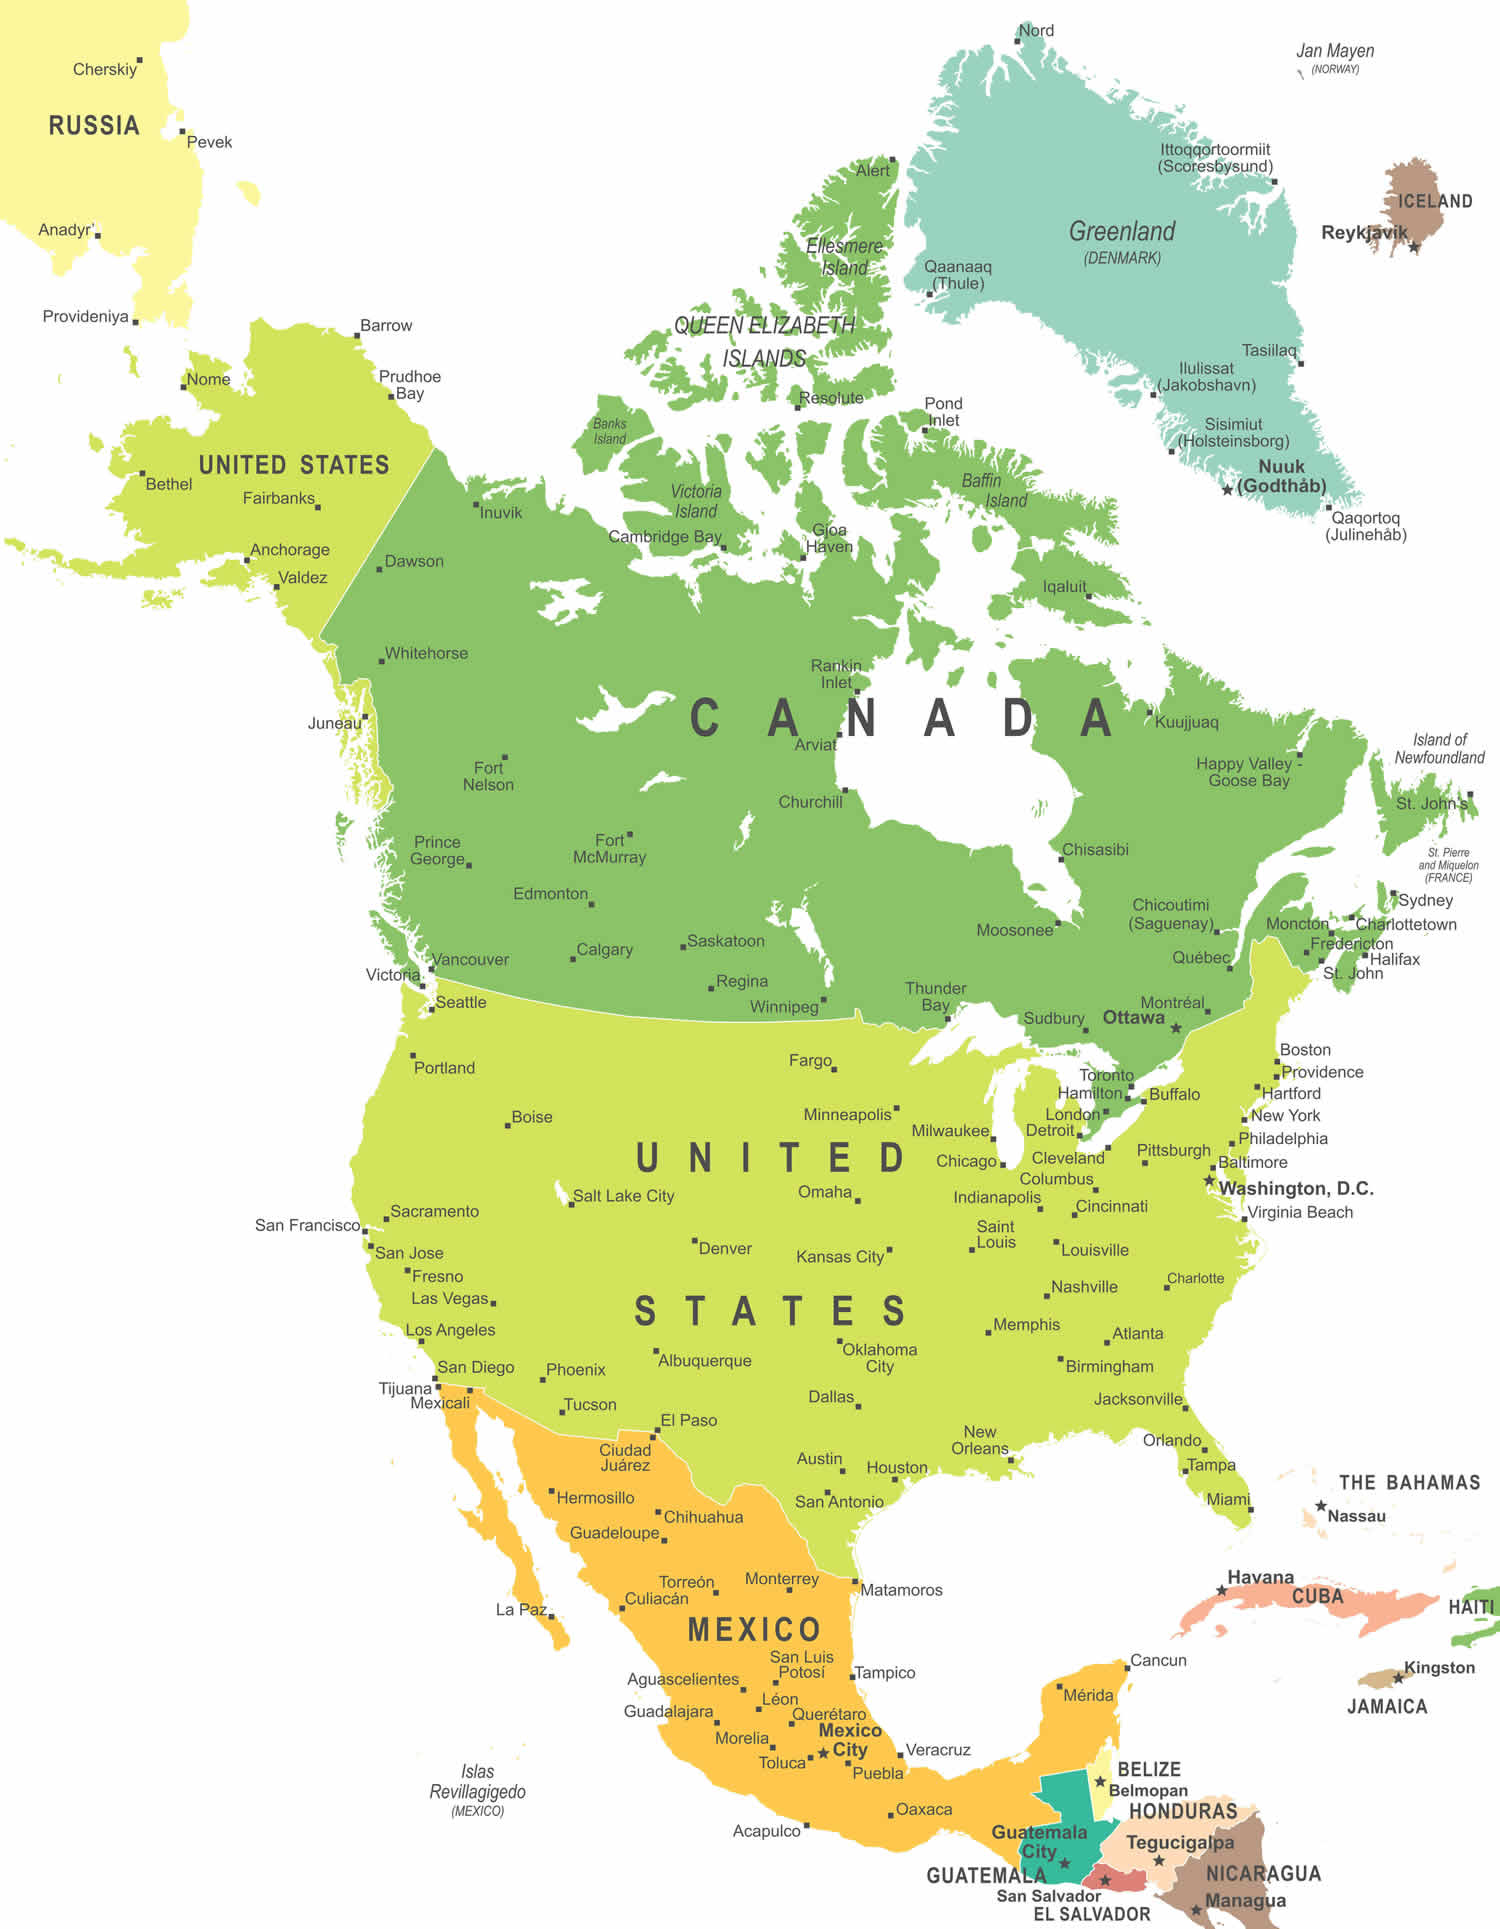 Political Map of North America - Guide of the World